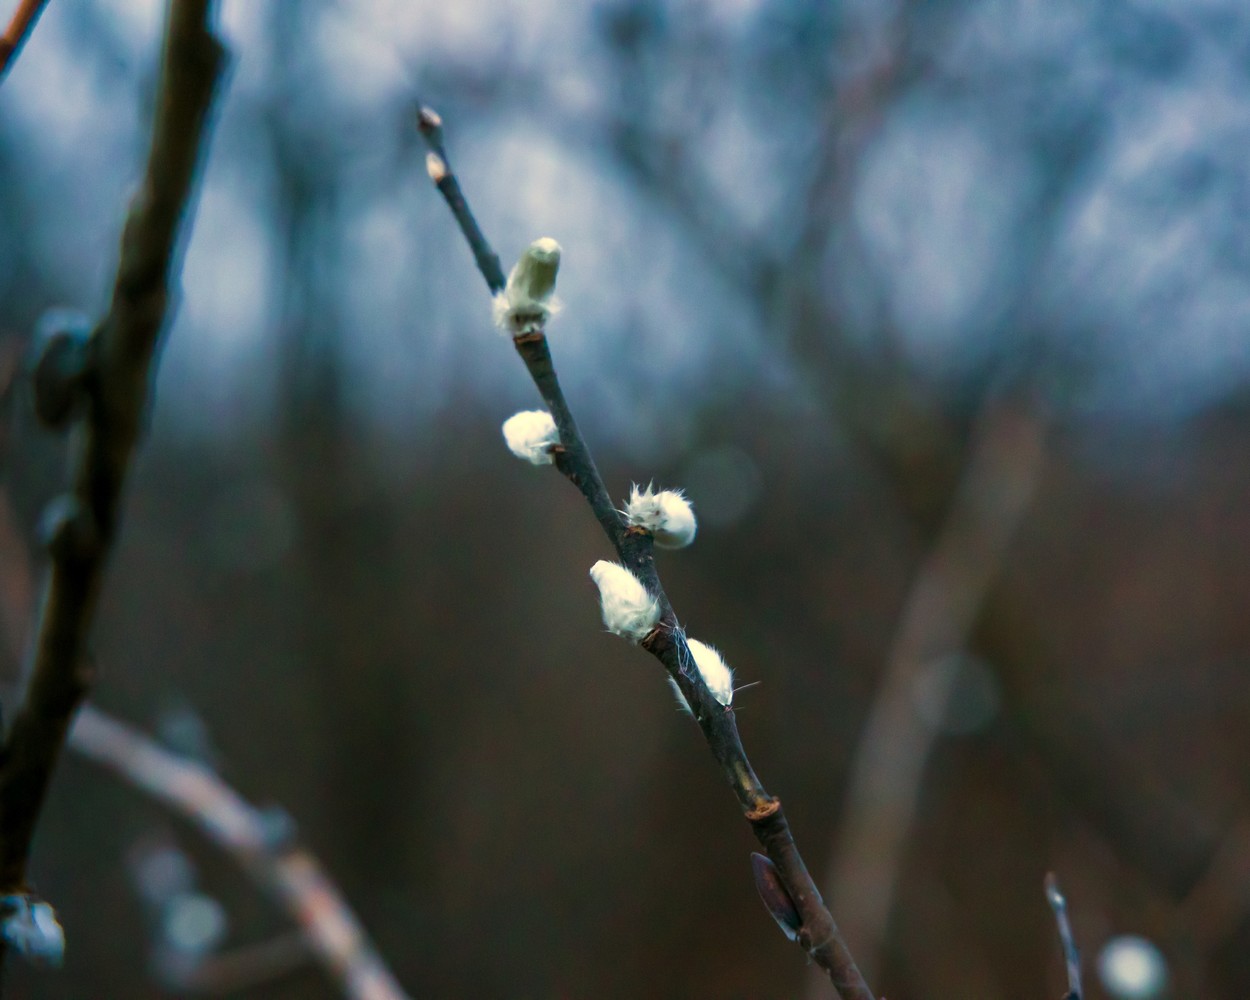 In the Southern Urals, a willow blossomed in November